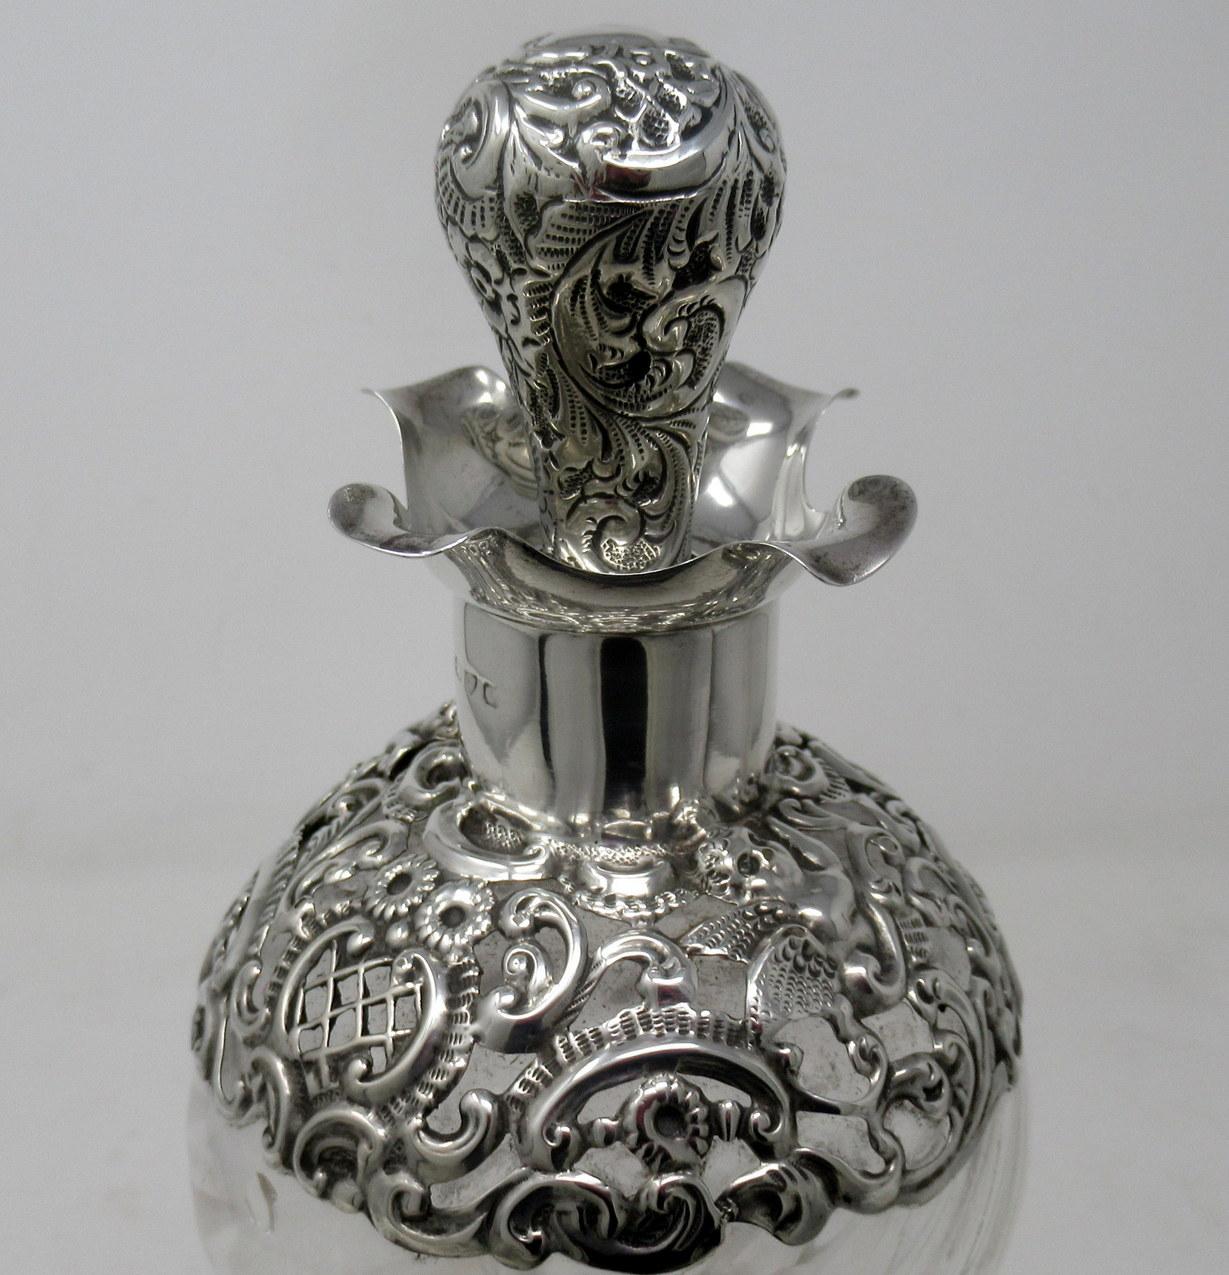 Hand-Carved Pair of Full Lead Crystal Hallmark Sterling Silver Spirits Wine Decanters, 1899